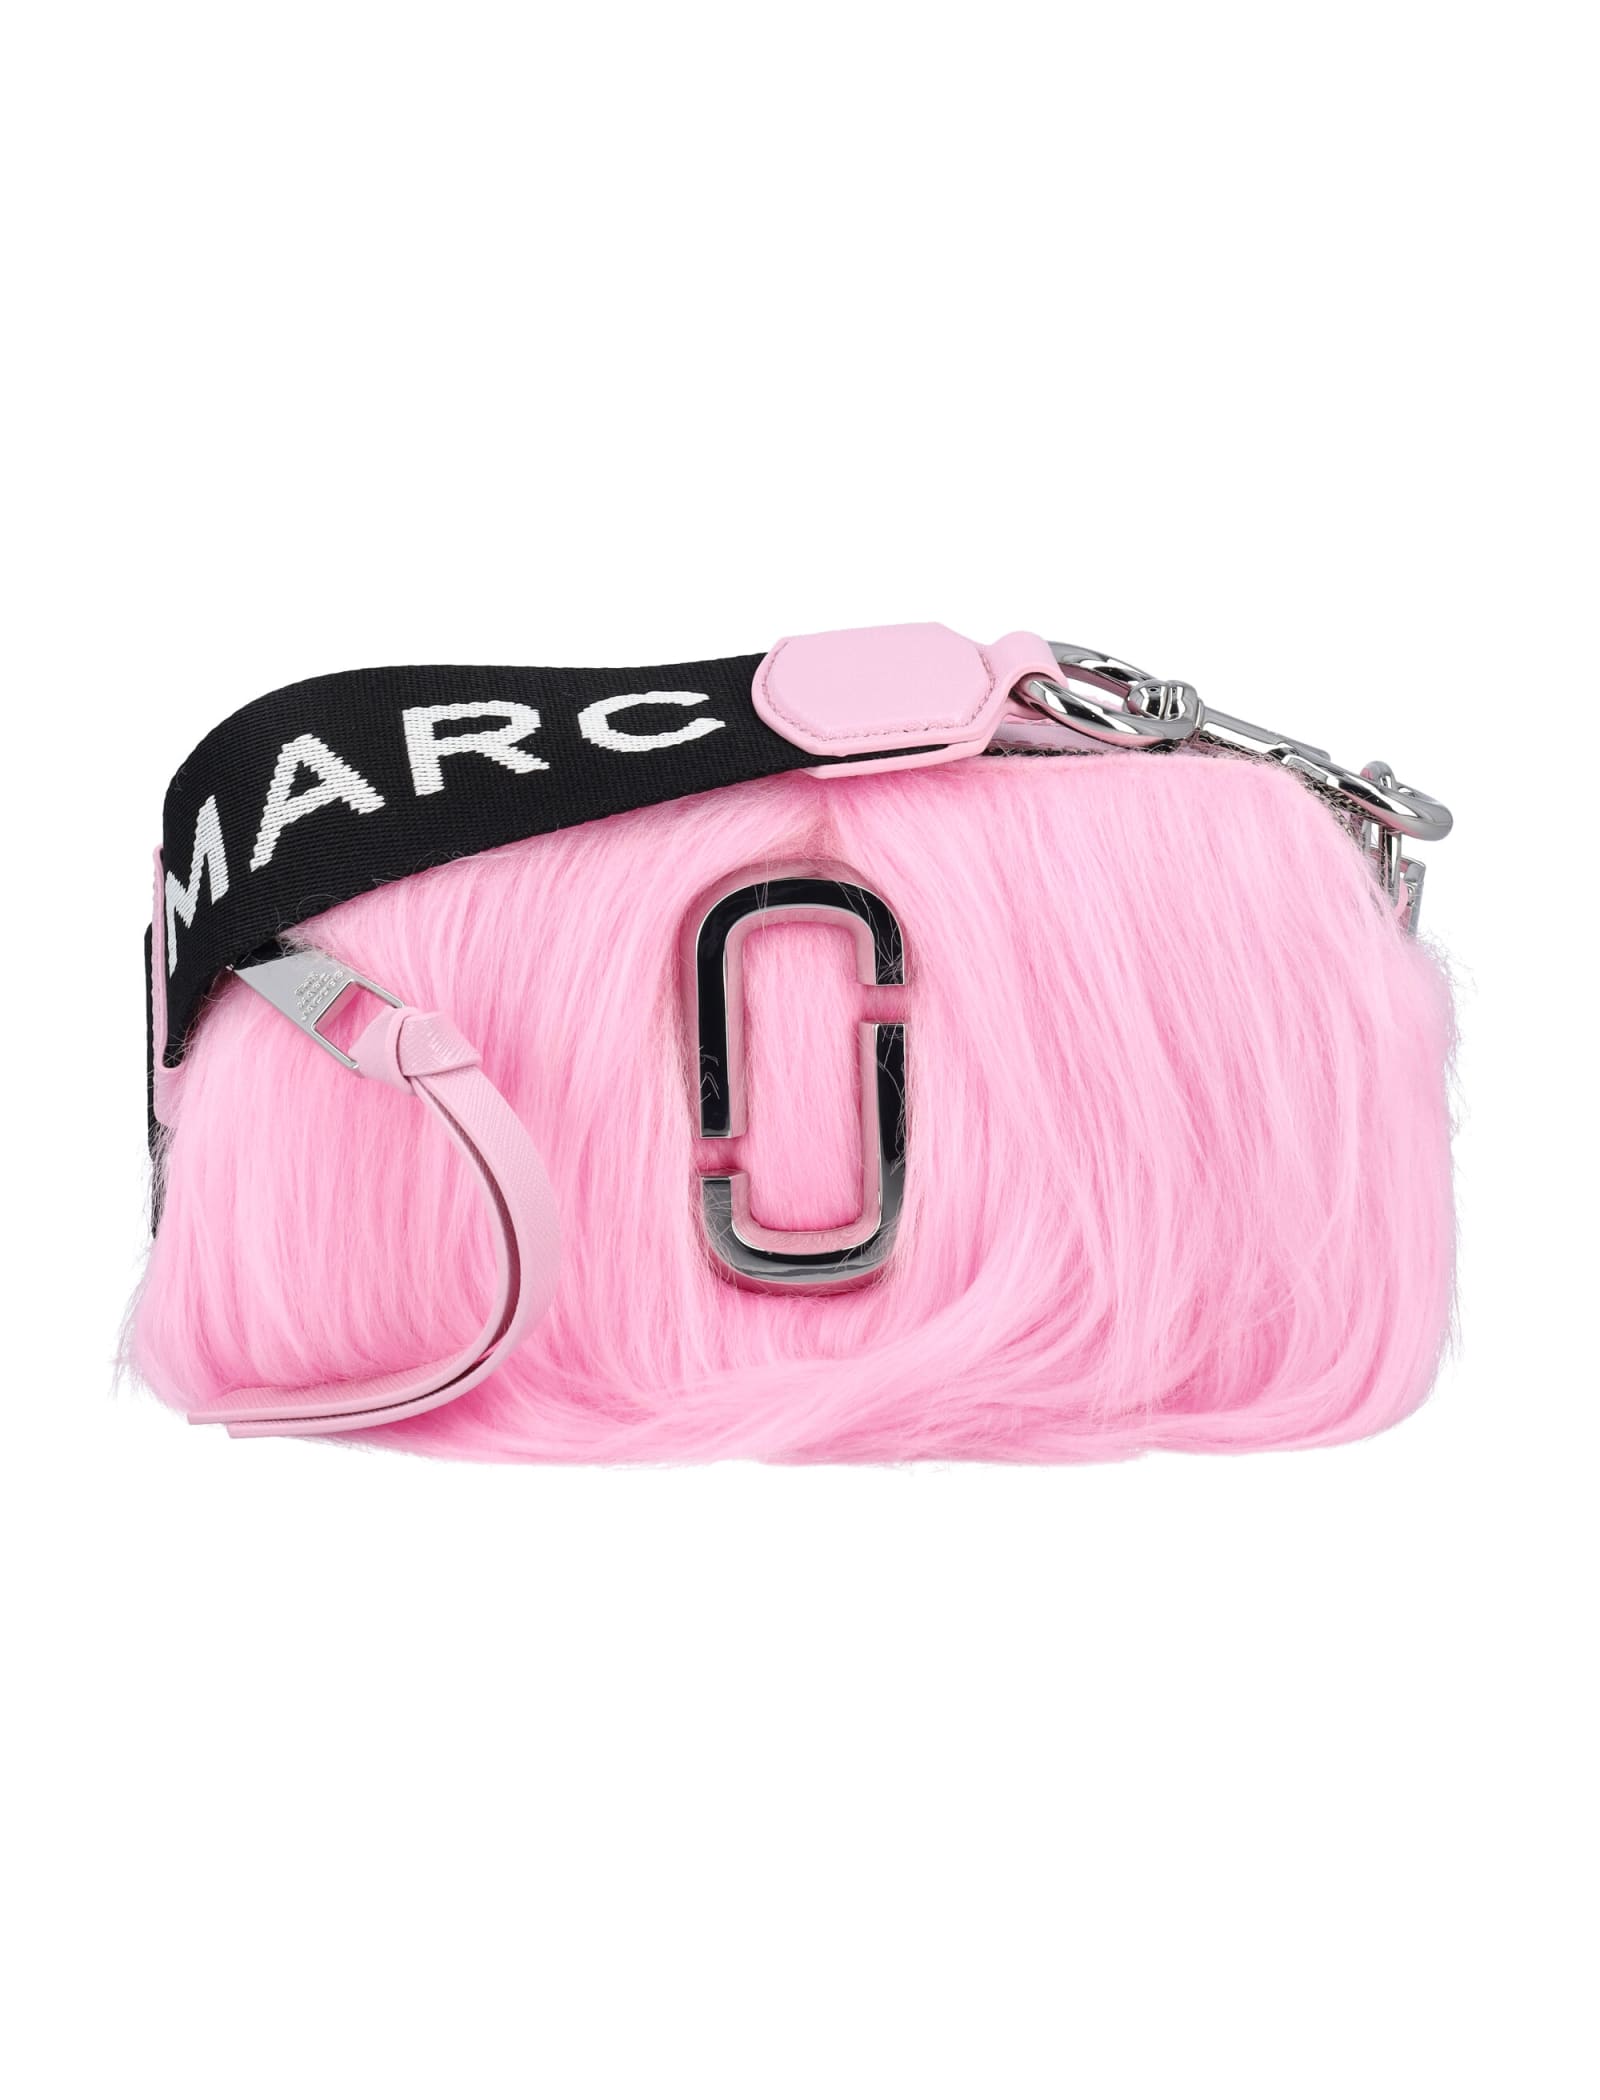 Marc Jacobs The Creature Snapshot Camera Bag In Pink | ModeSens